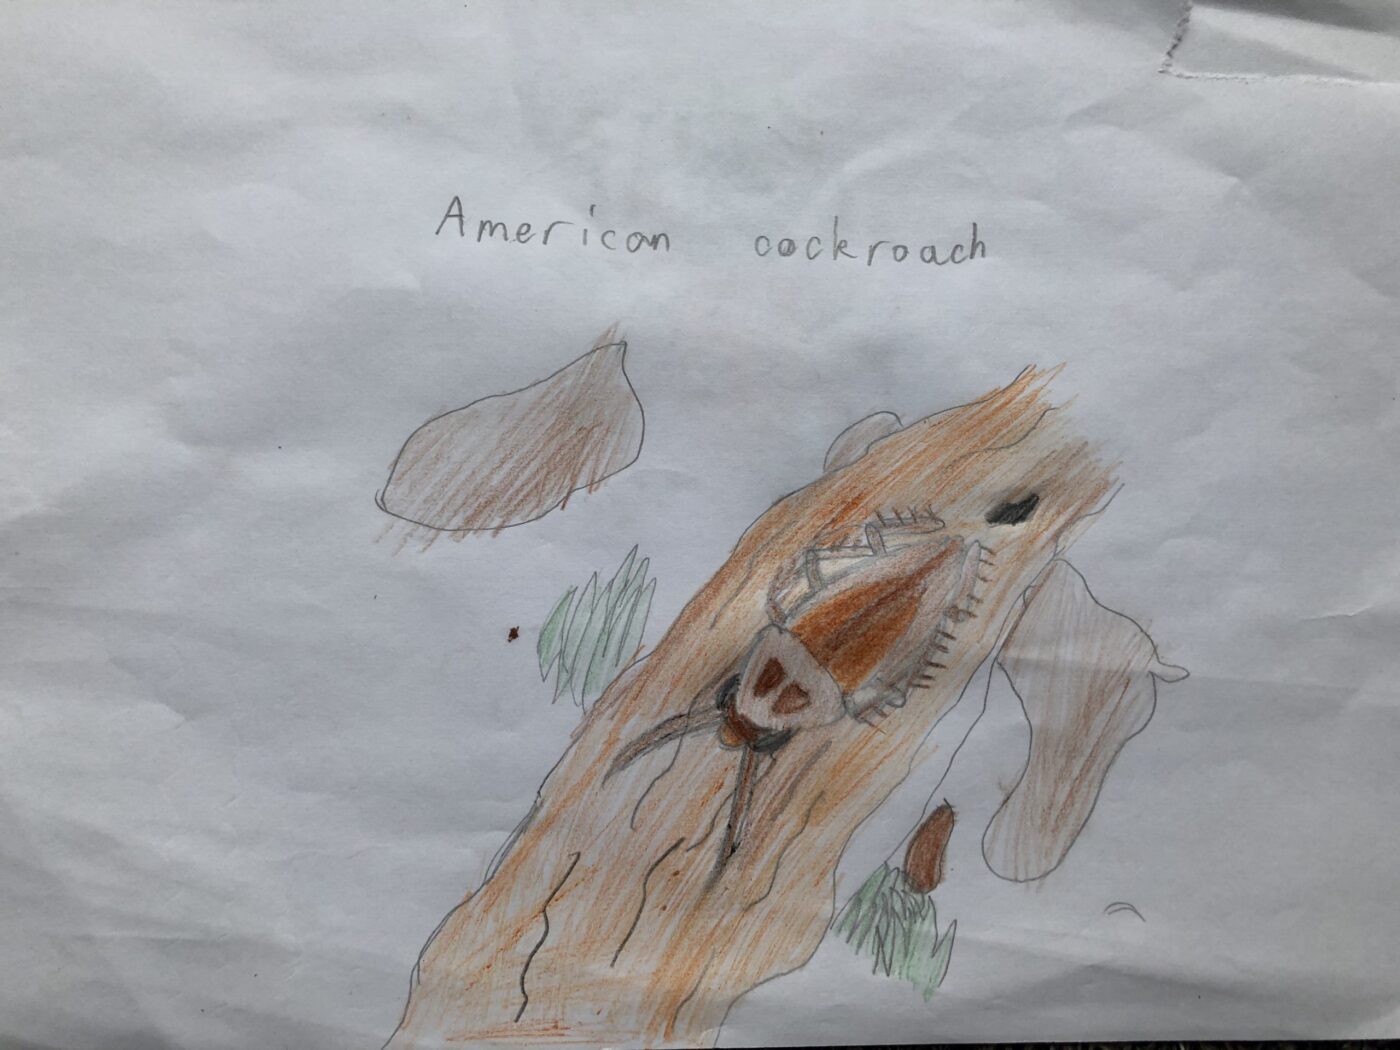 American Cockroach by Jake Ross, Highly Commended in age 8-12 category, Insect Week 2022 art competition